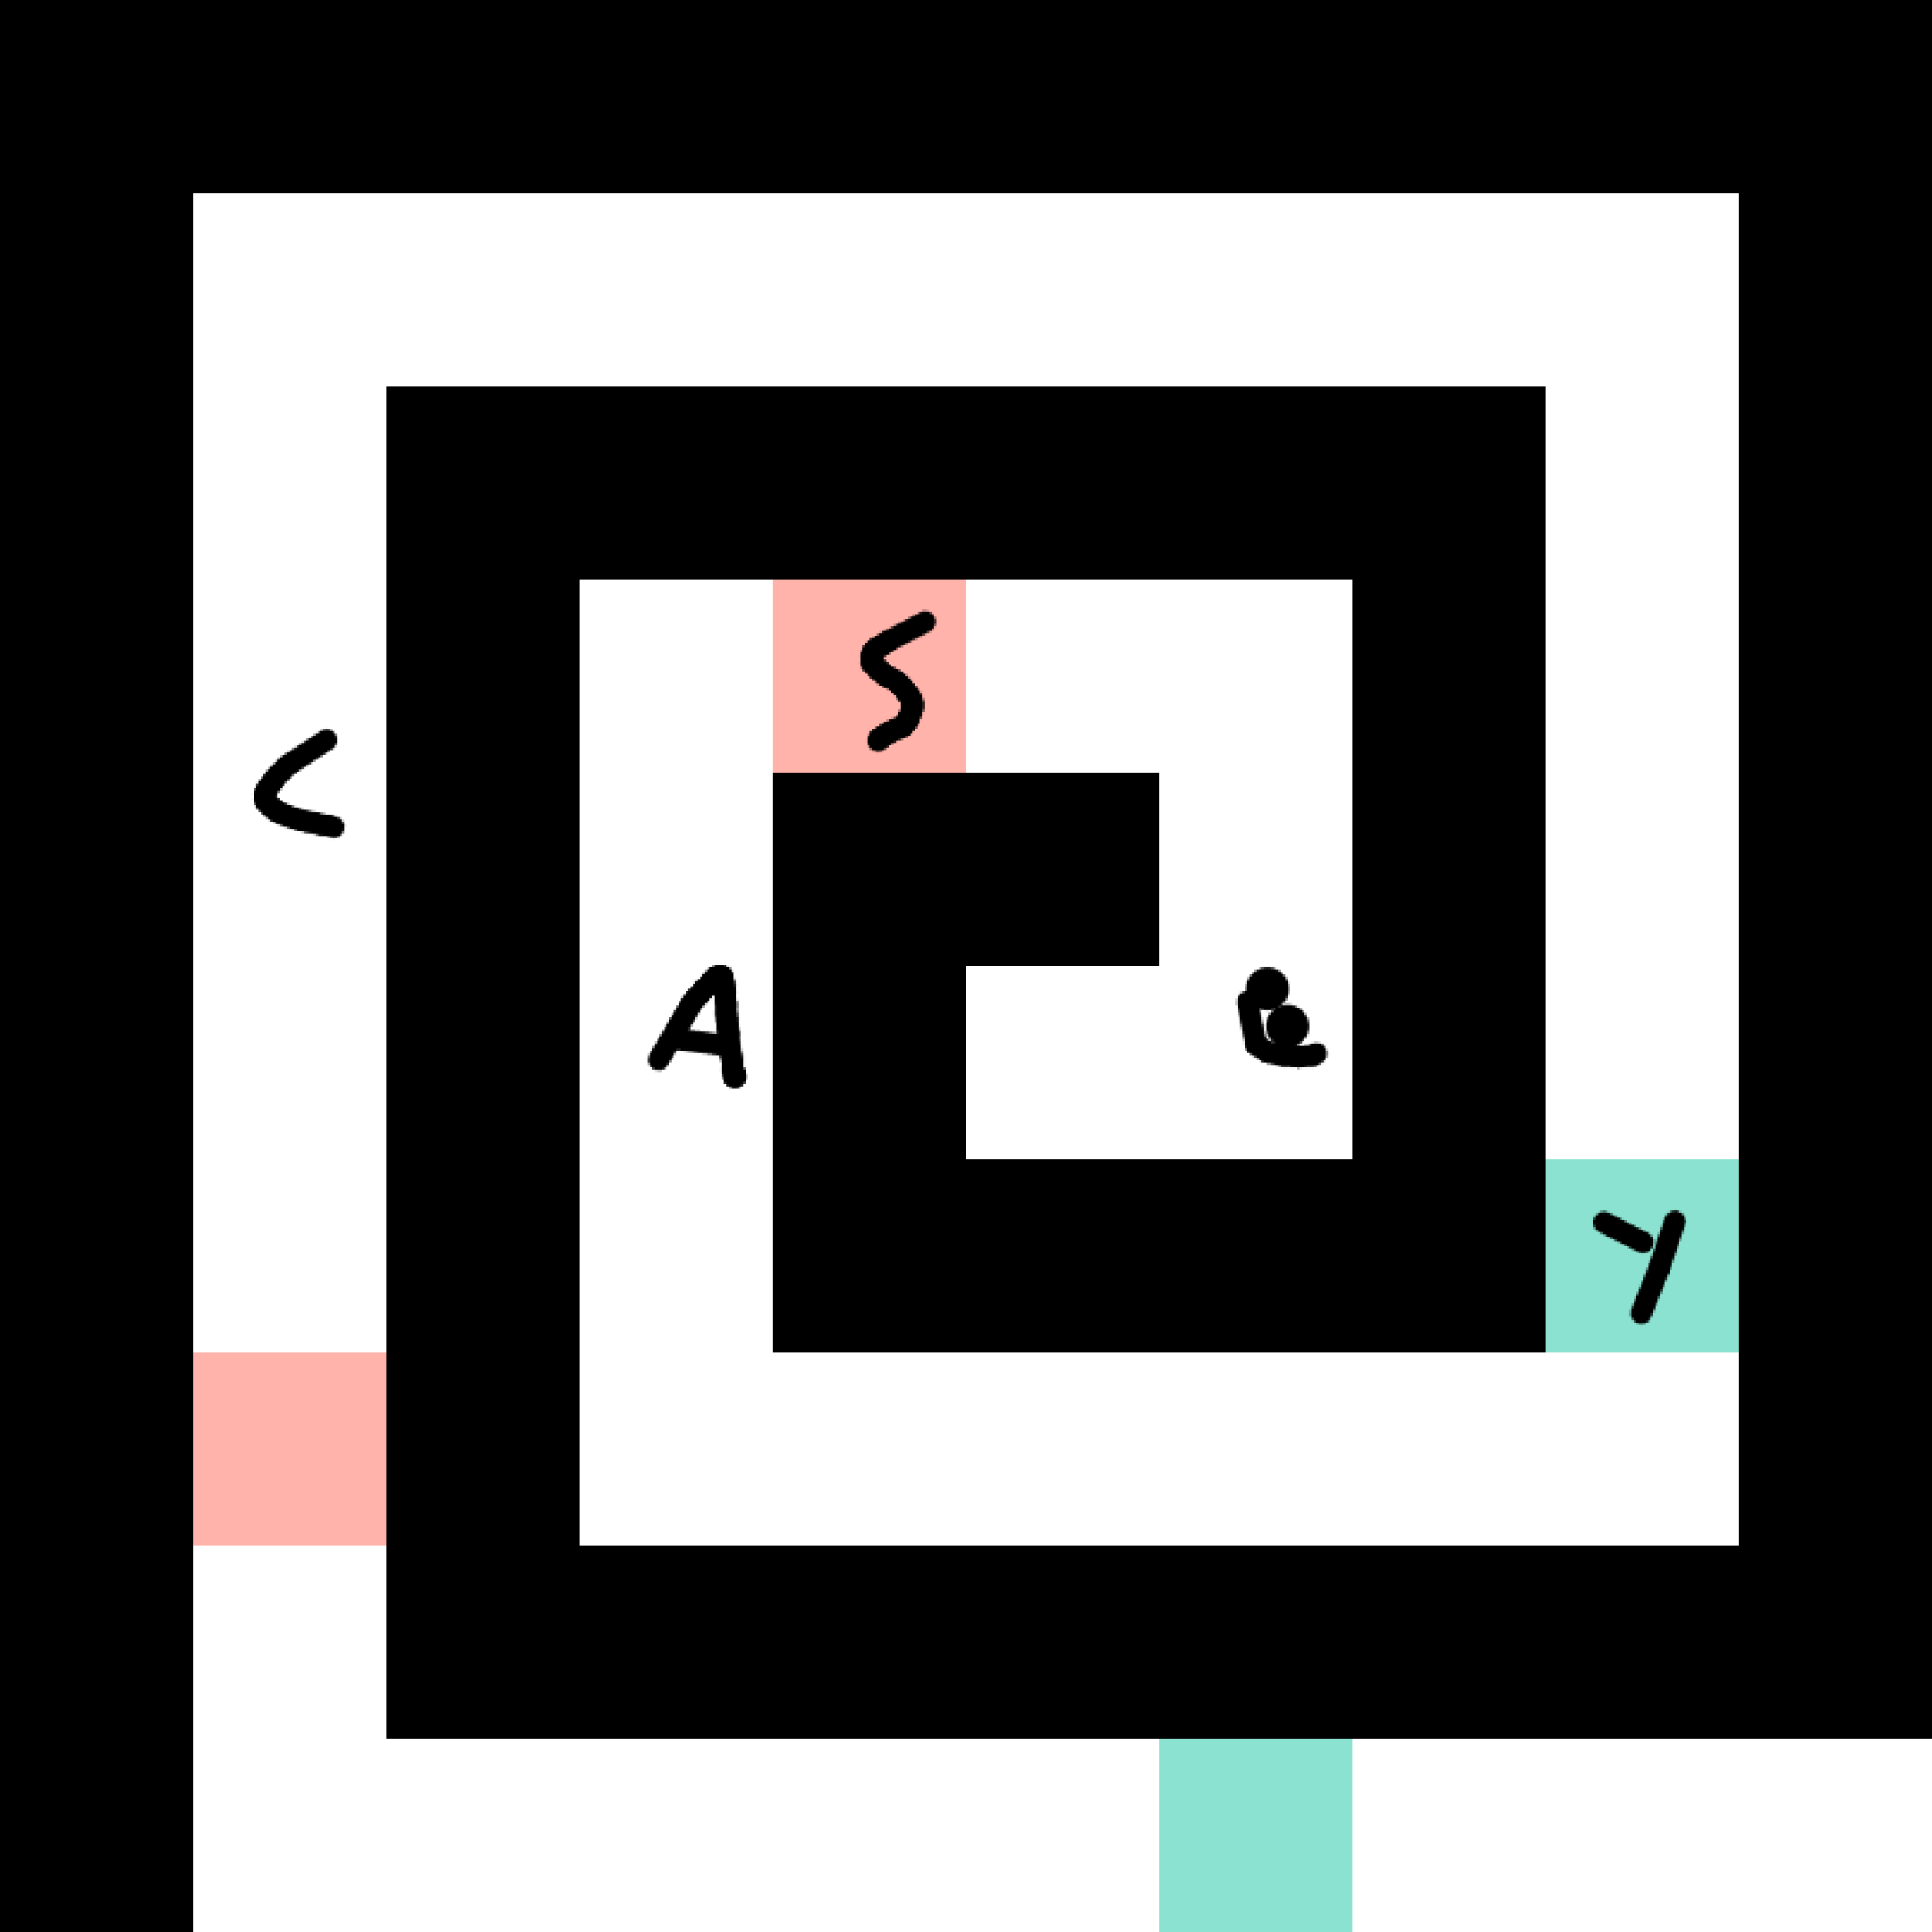 A digital drawing of a black meandering line, evocative of a shell, with a few pale colored squares and the name CASEY written in black across the white space and colored squares